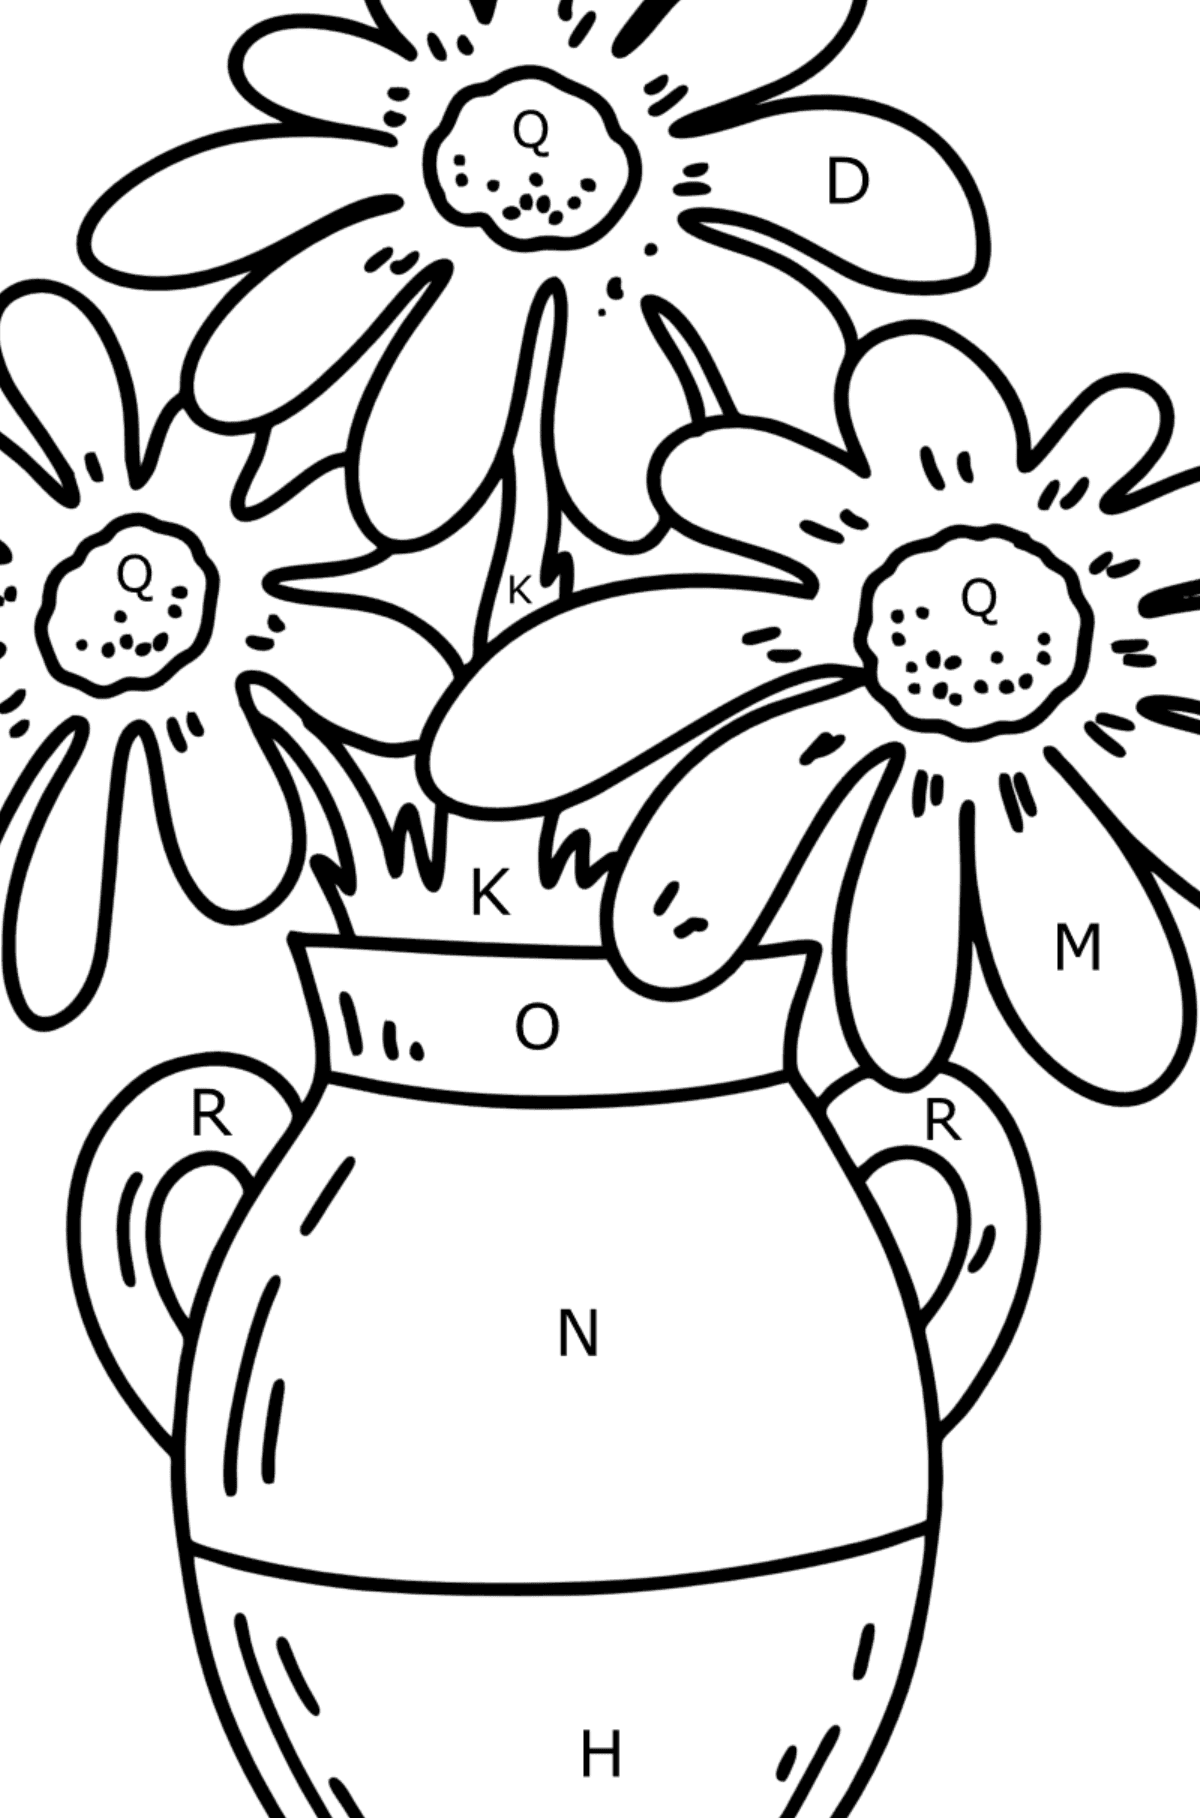 Summer Coloring page - Flowers in a vase - Coloring by Letters for Kids